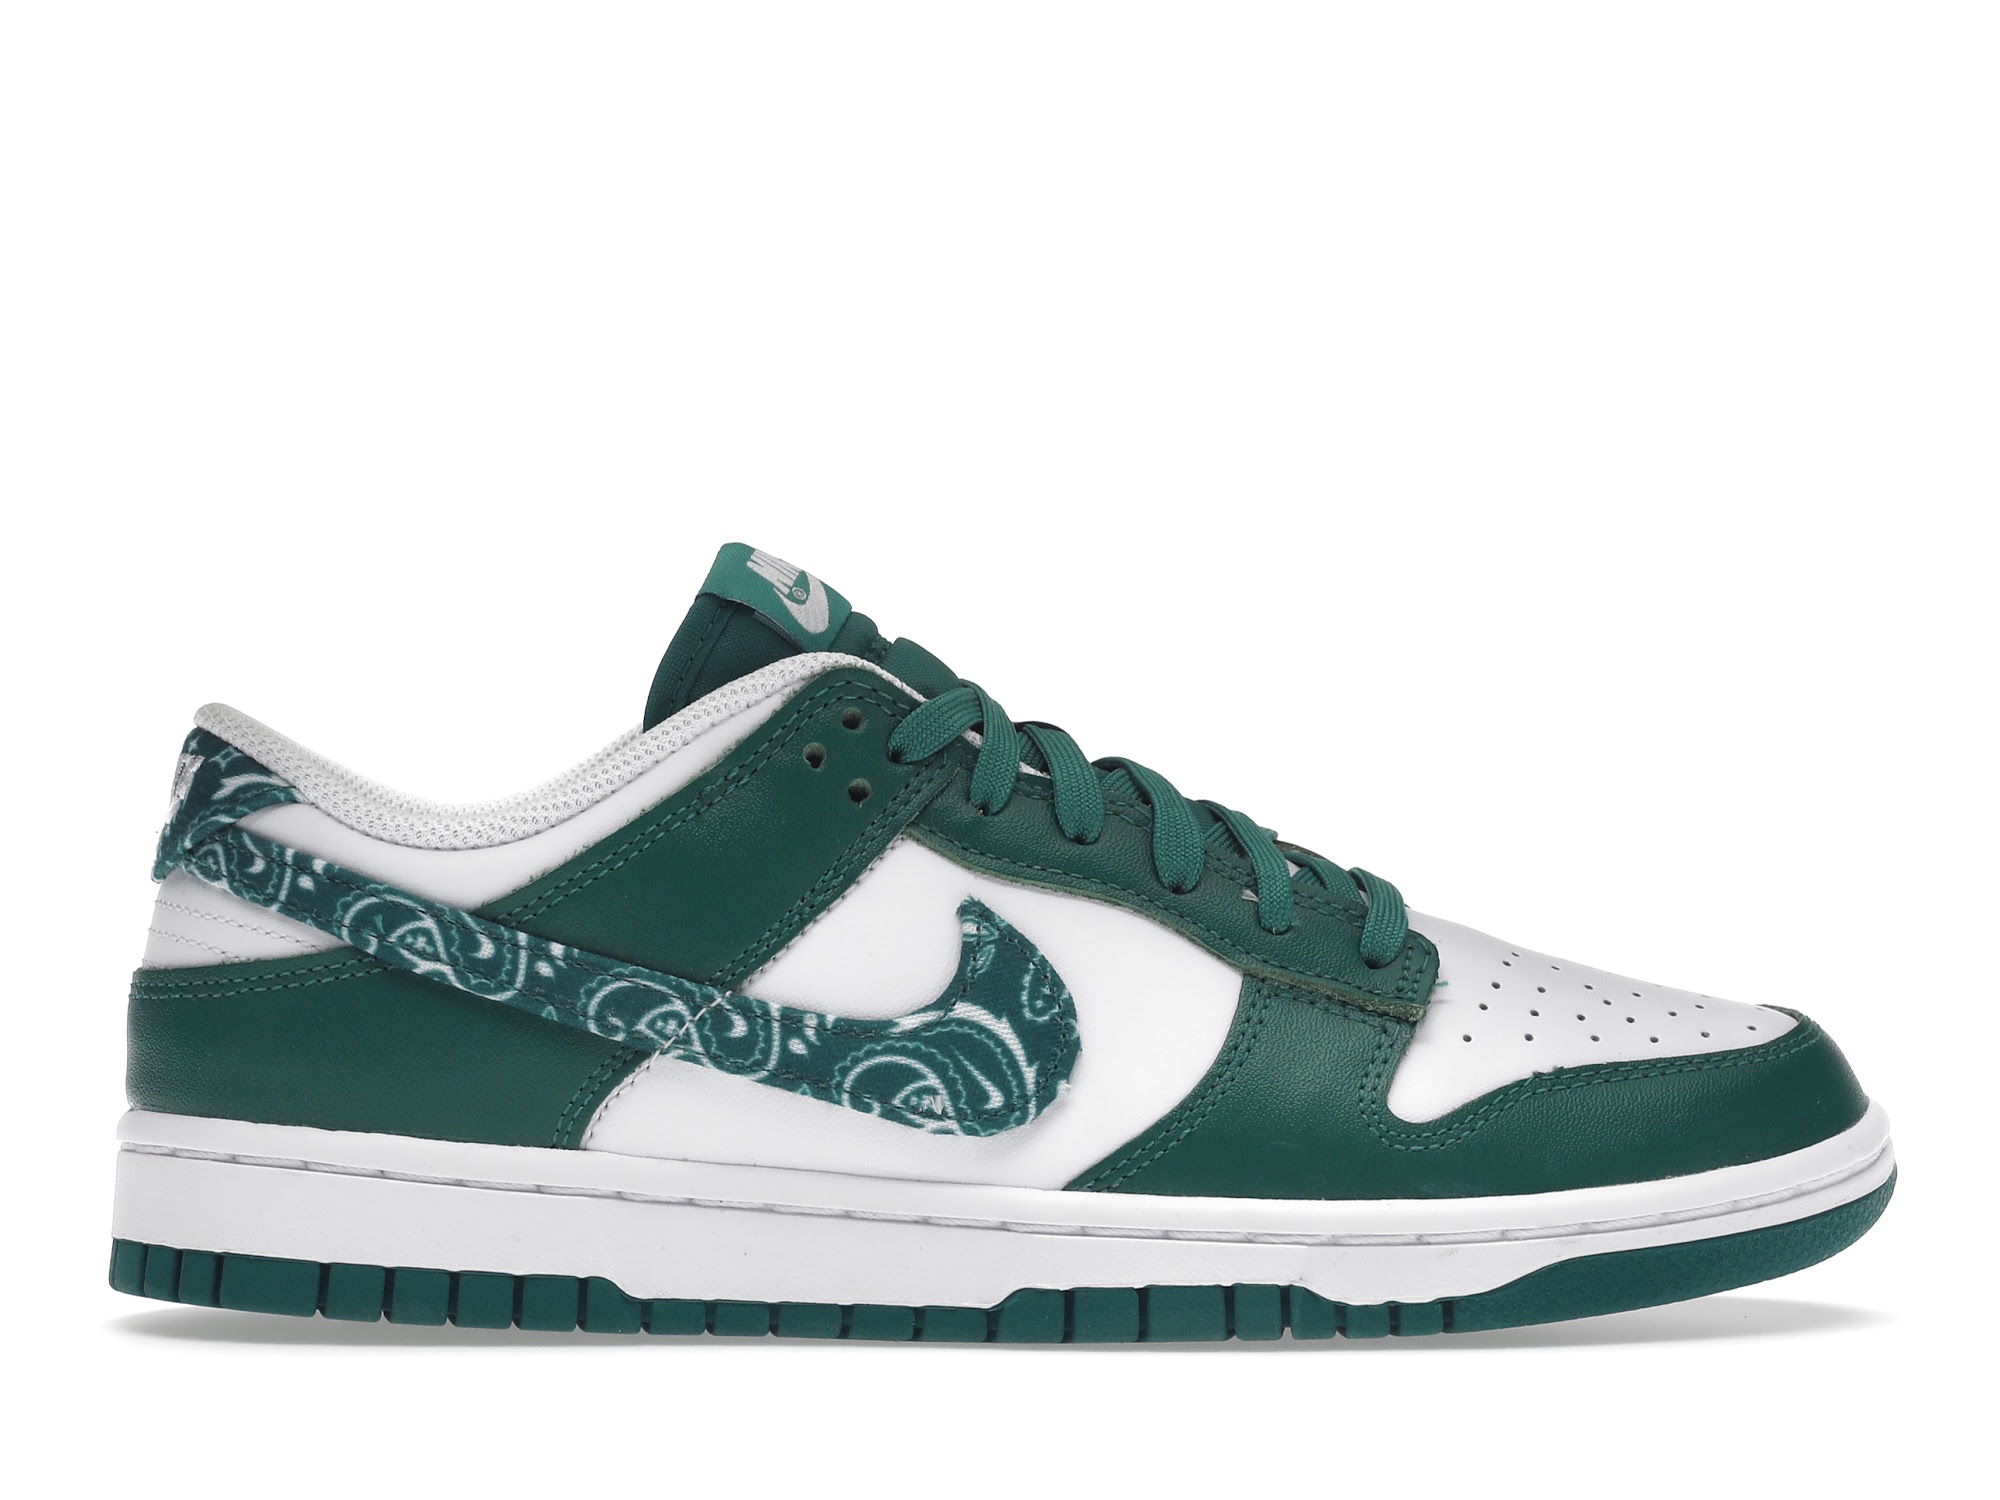 Nike WMNS Dunk Low Paisley Pack ペイズリーダンク